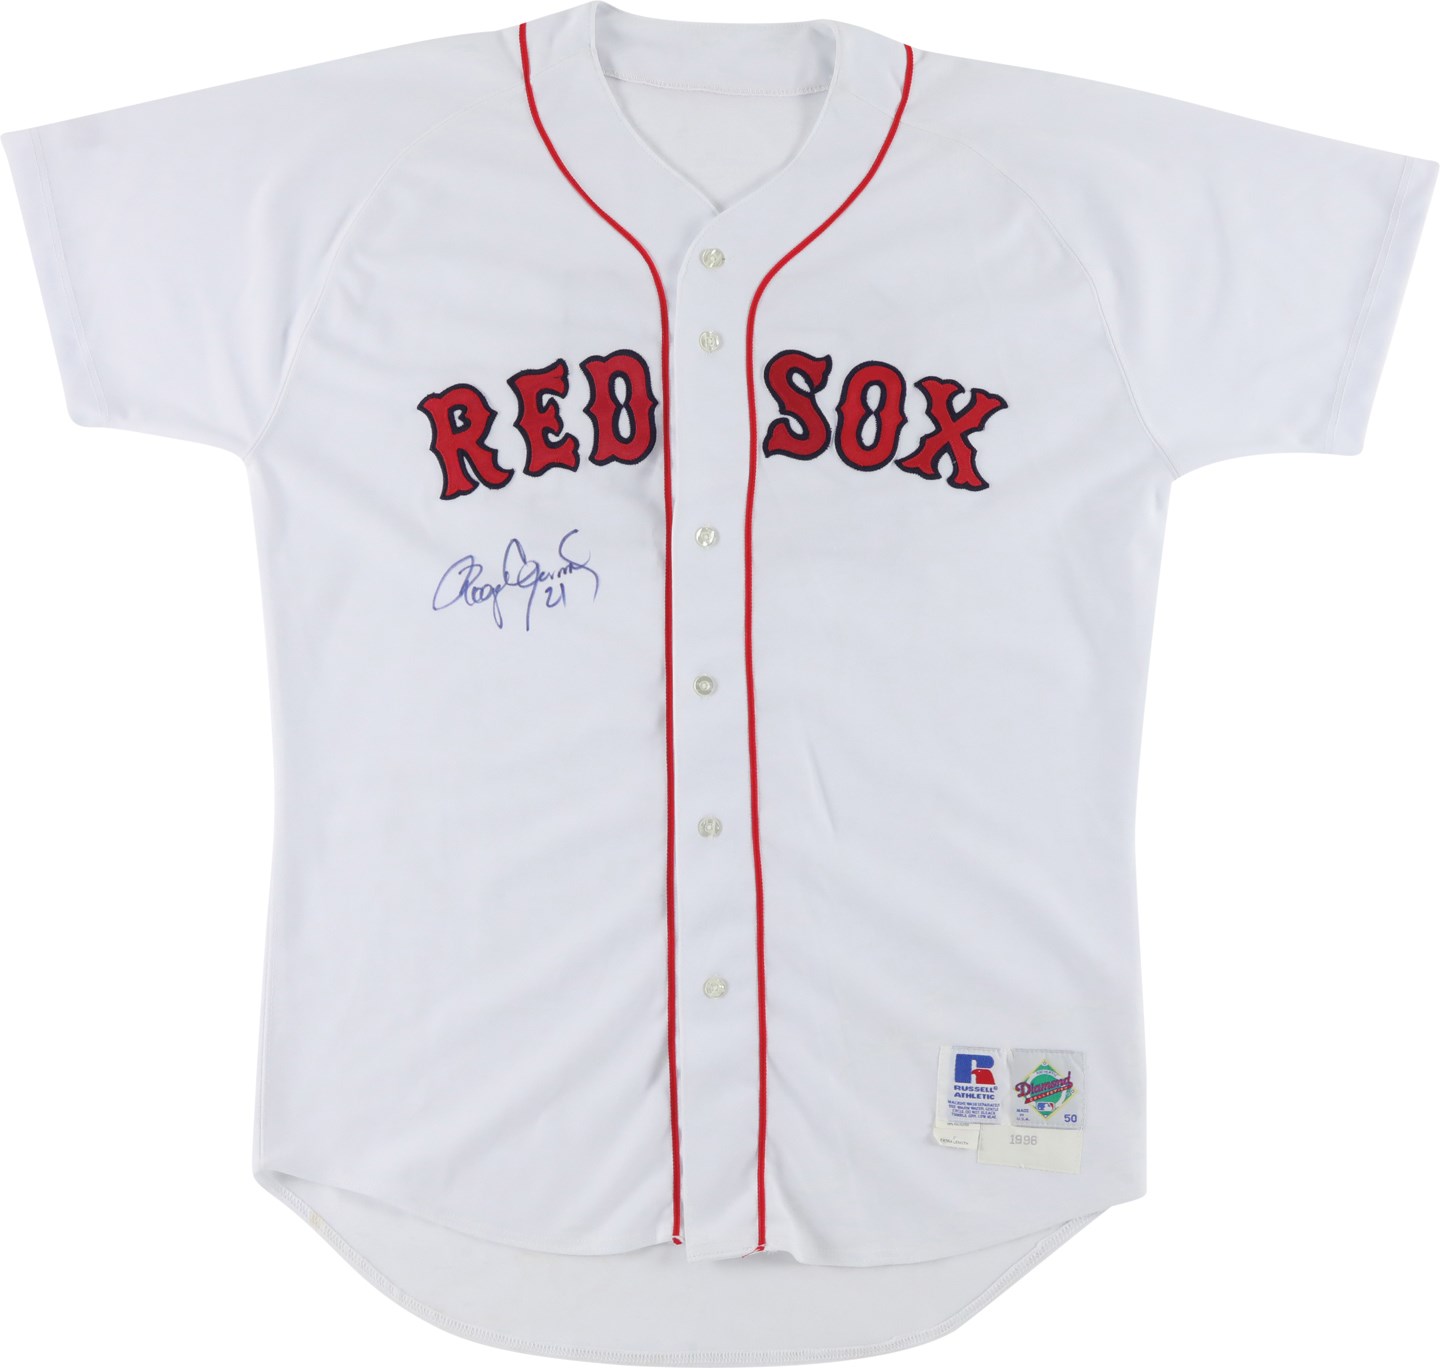 - 1996 Roger Clemens Boston Red Sox Signed Game Worn Jersey (PSA)